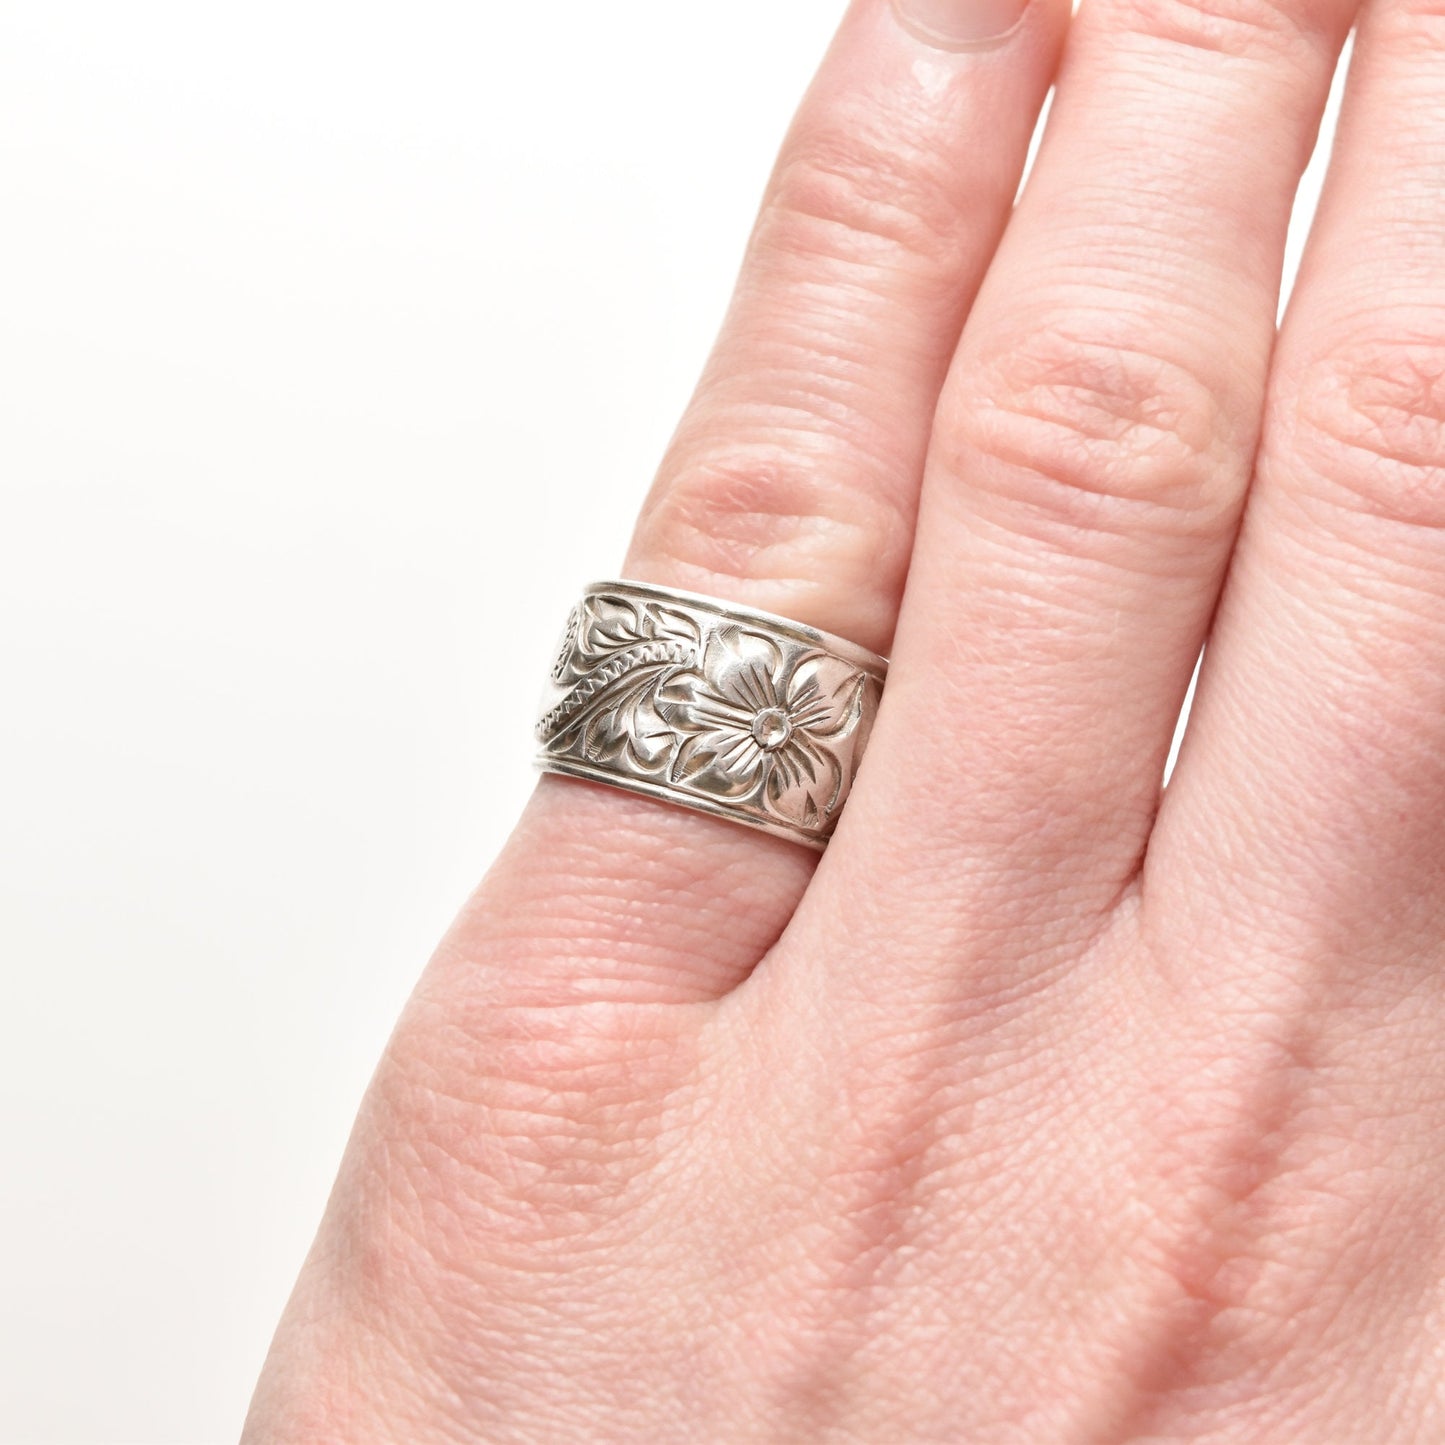 Floral engraved sterling silver band ring, 11.5mm wide, in an Art Nouveau style, size 6 US, shown on a finger against a white background.